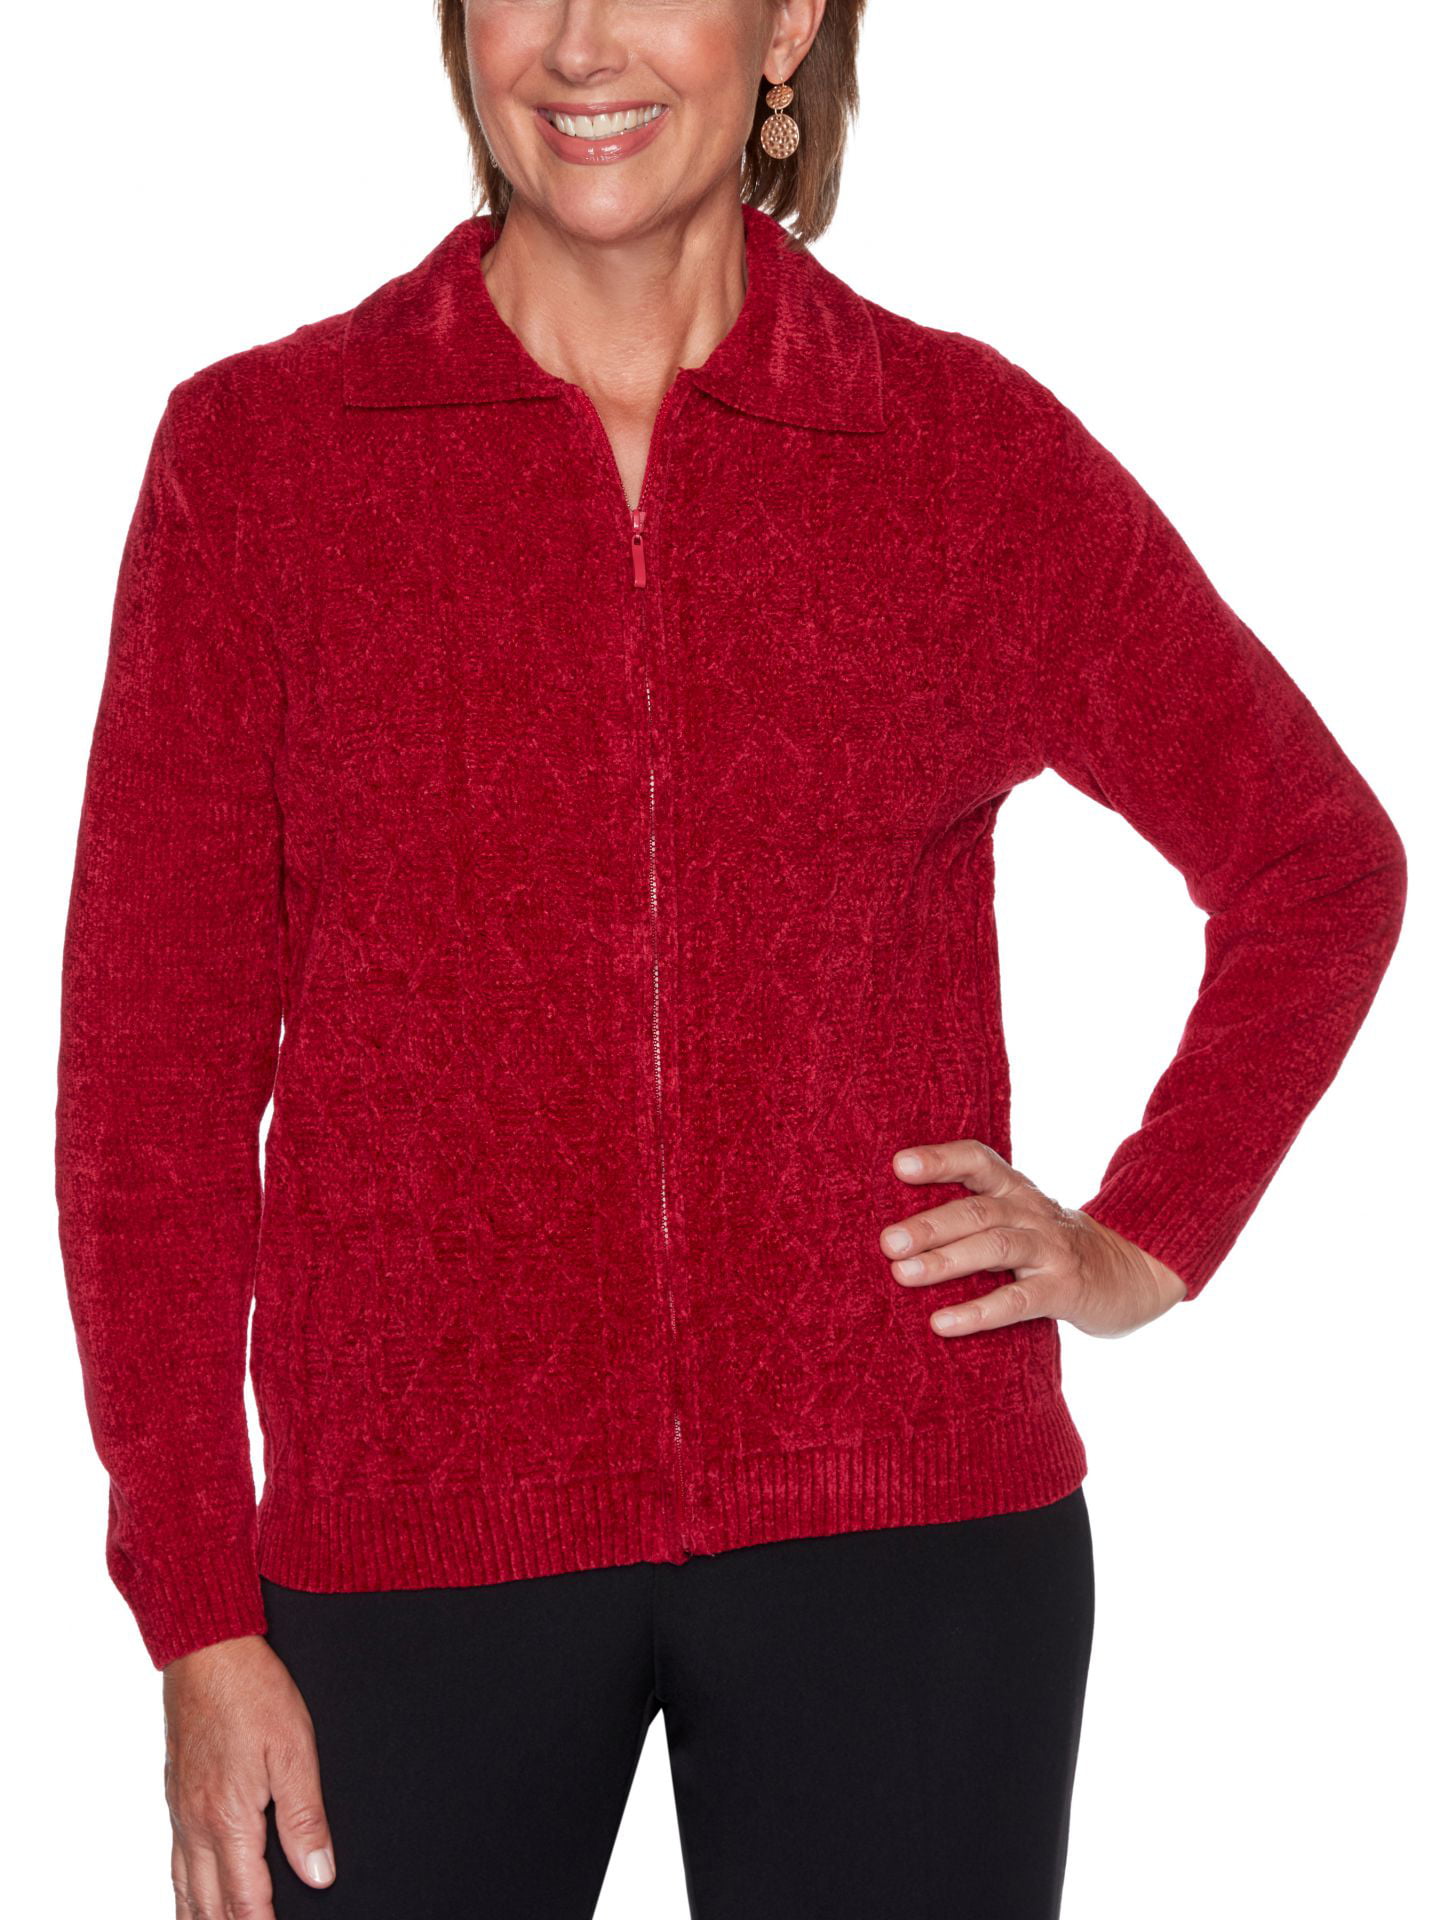 New Mens Knitted Full Zip Lined Chenille Classic Cardigan Jumper Sweater  M-XXL